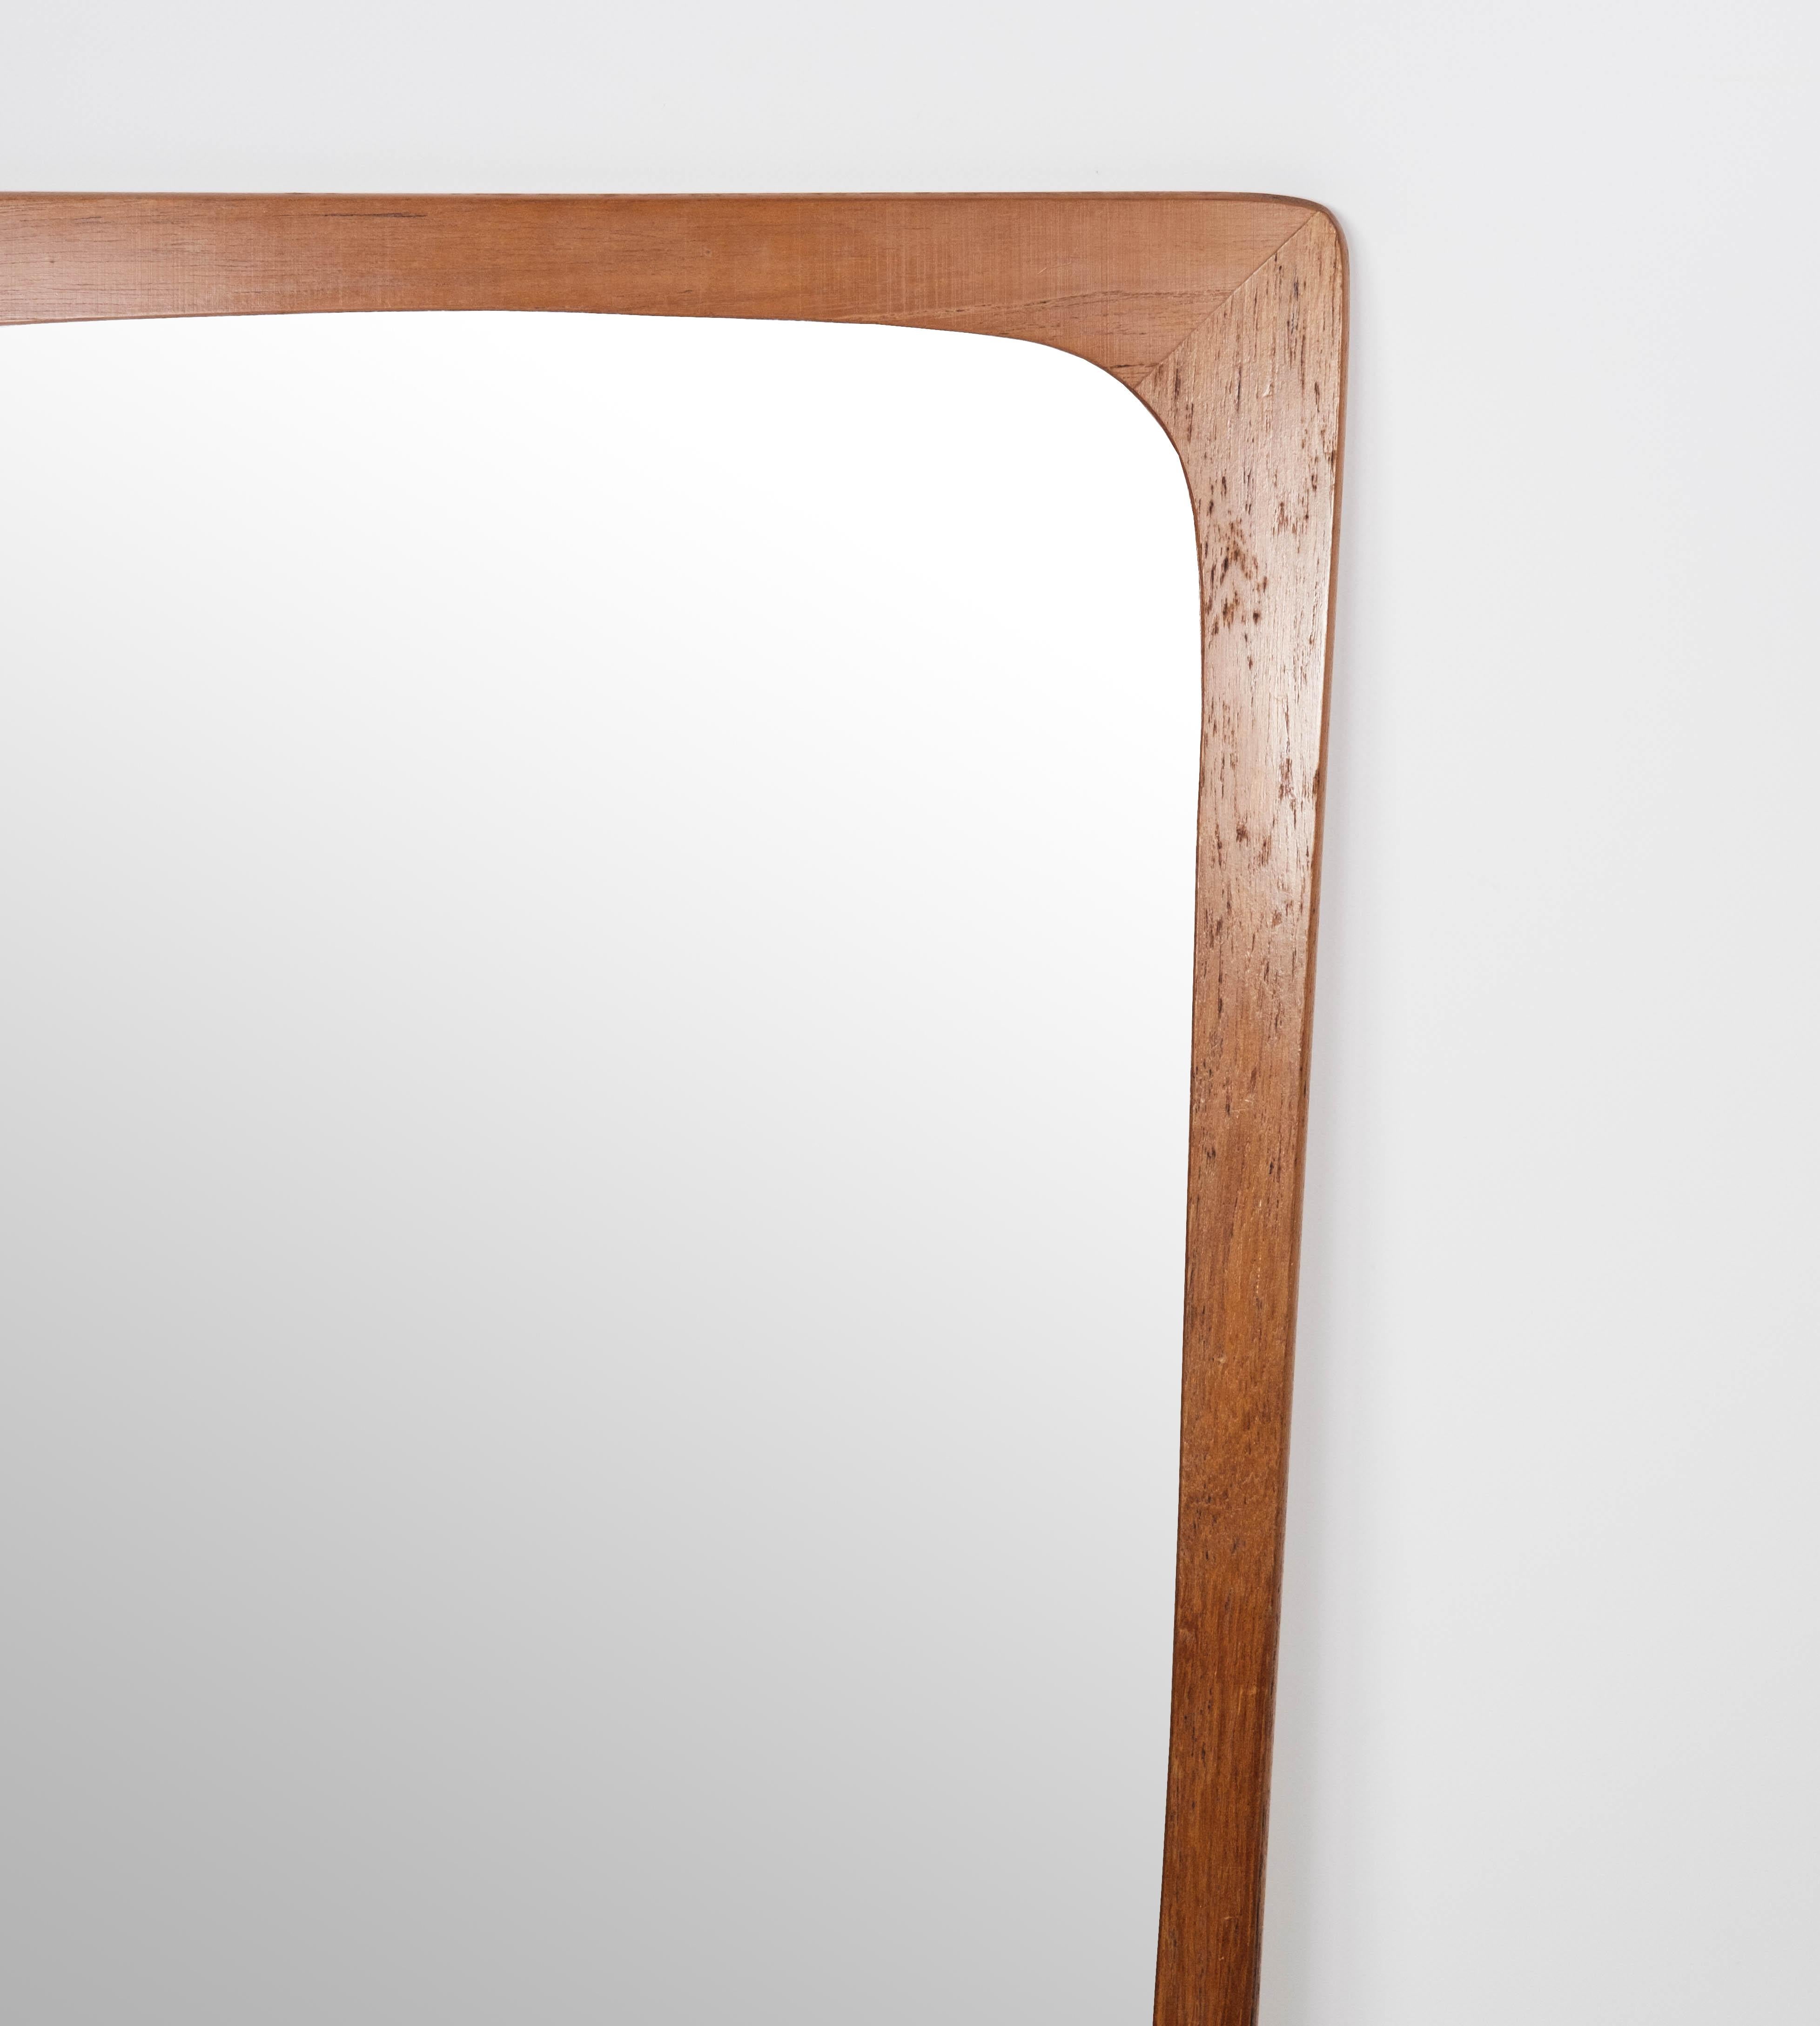 This teak mirror with a built-in shelf epitomizes the timeless elegance of Danish design from the 1960s. Its sleek and functional design makes it a versatile piece that seamlessly blends style with practicality.

Crafted from teak, renowned for its